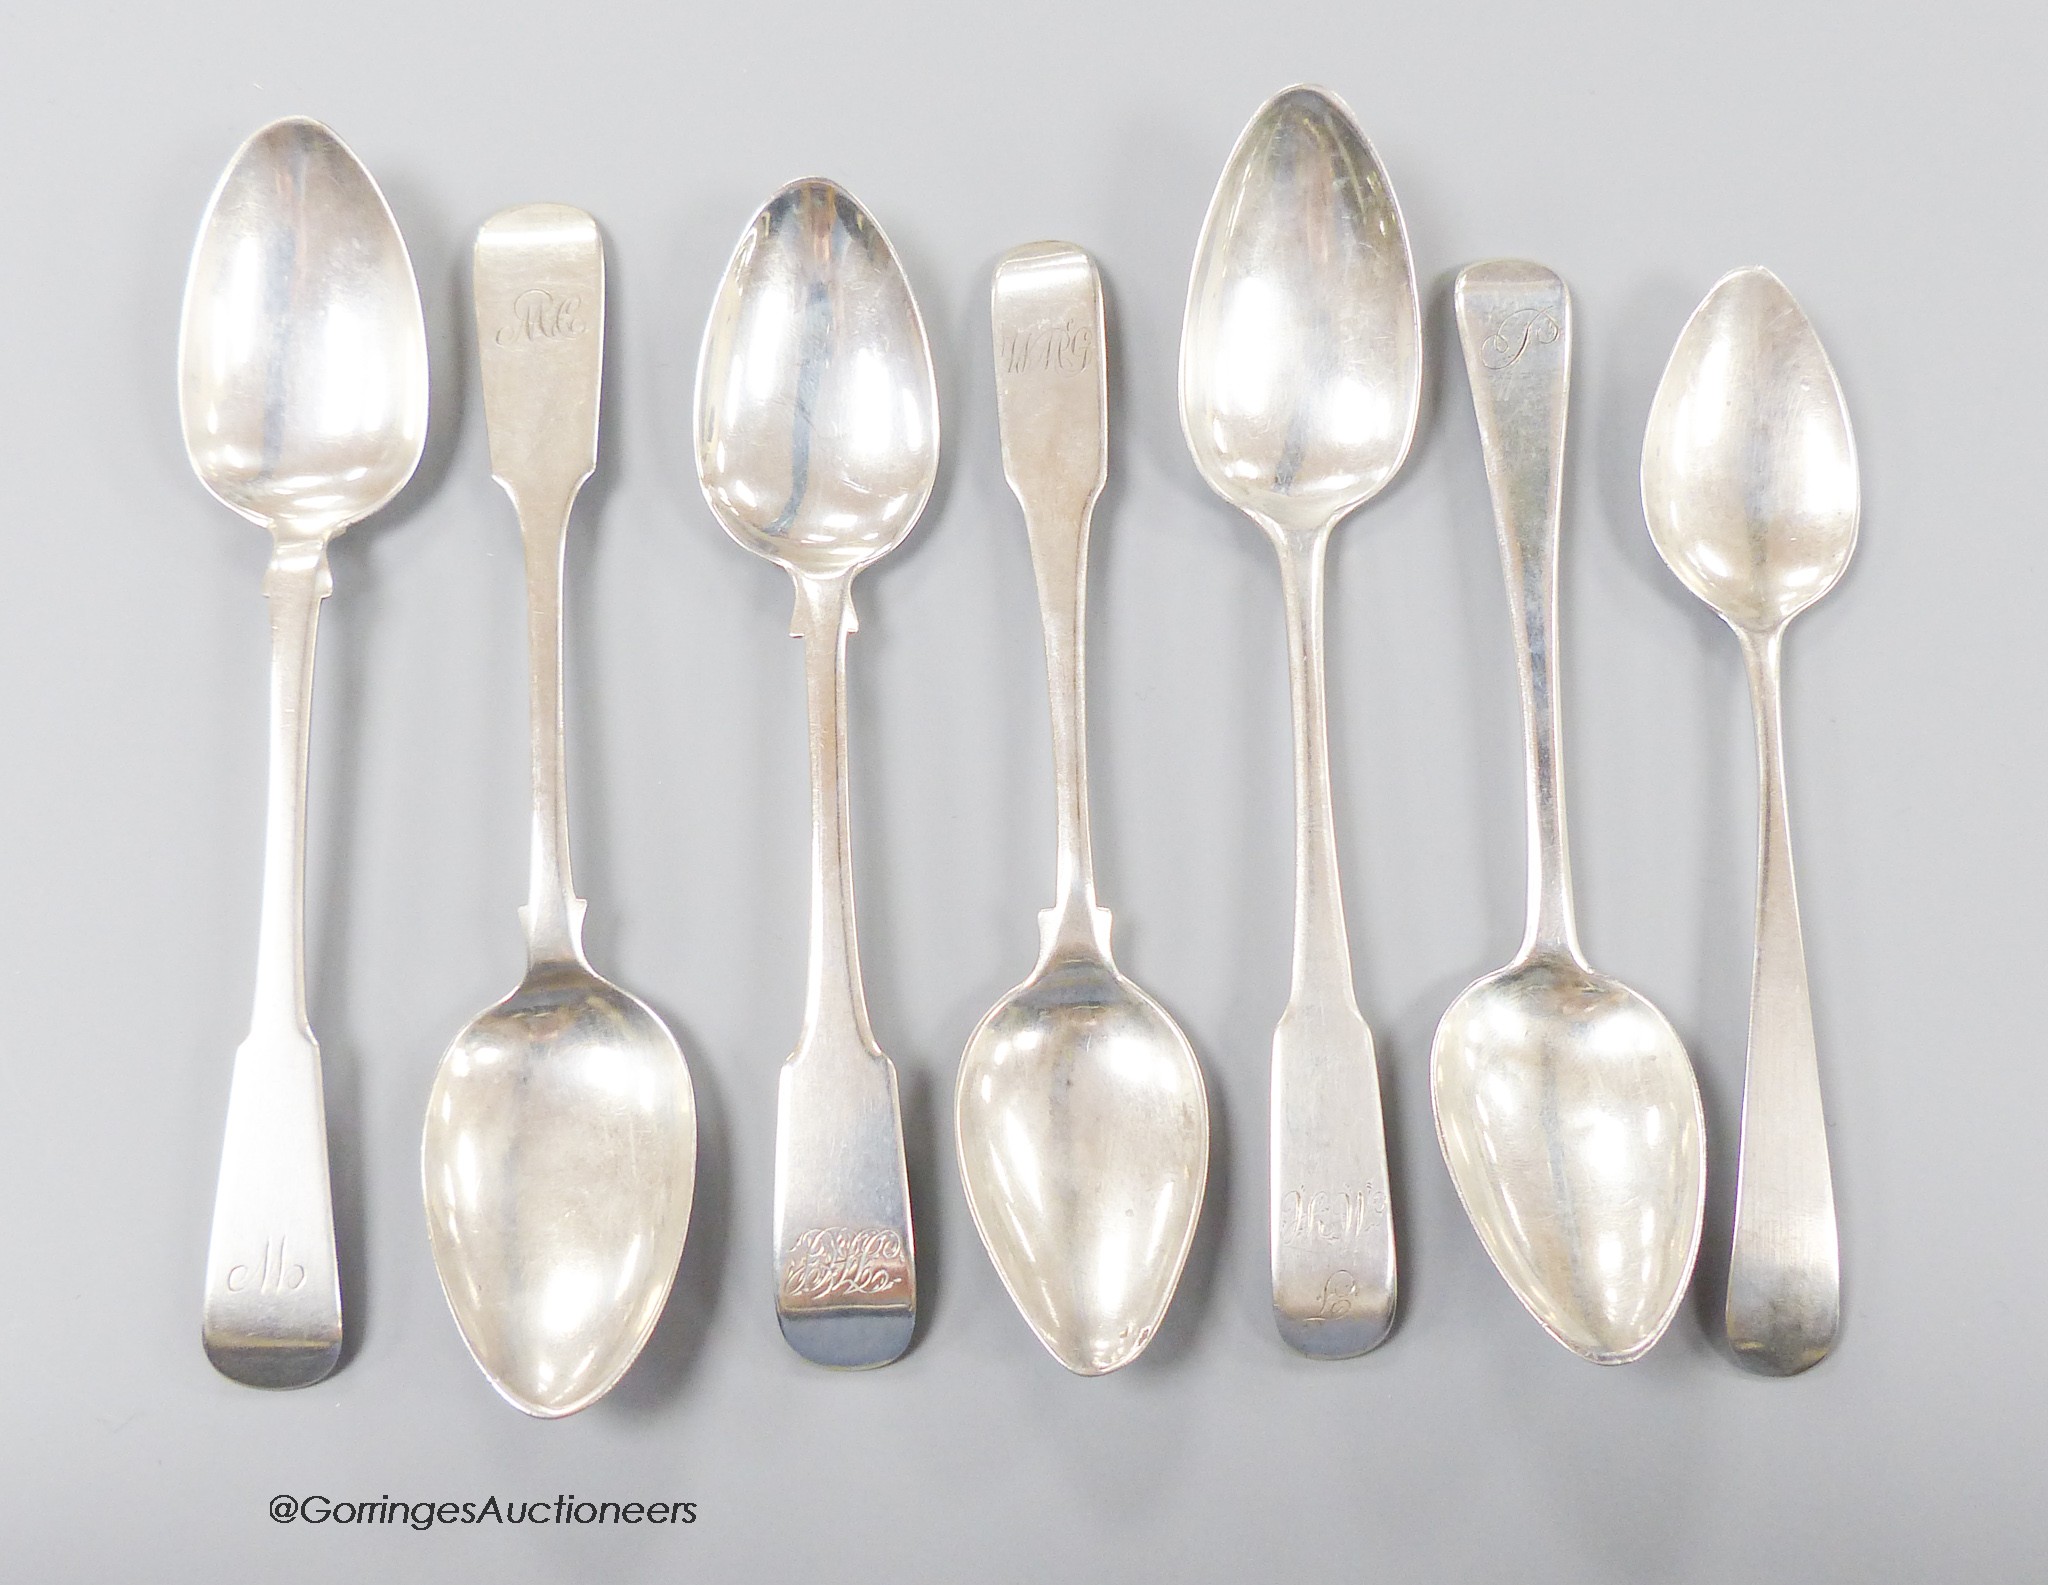 Seven 19th century Scottish provincial silver teaspoons, Old English or fiddle patterns, all Dumfries, David Gray(4), Joseph Pearson(2) and Mark Hinchcliffe, longest 14cm, 3oz.